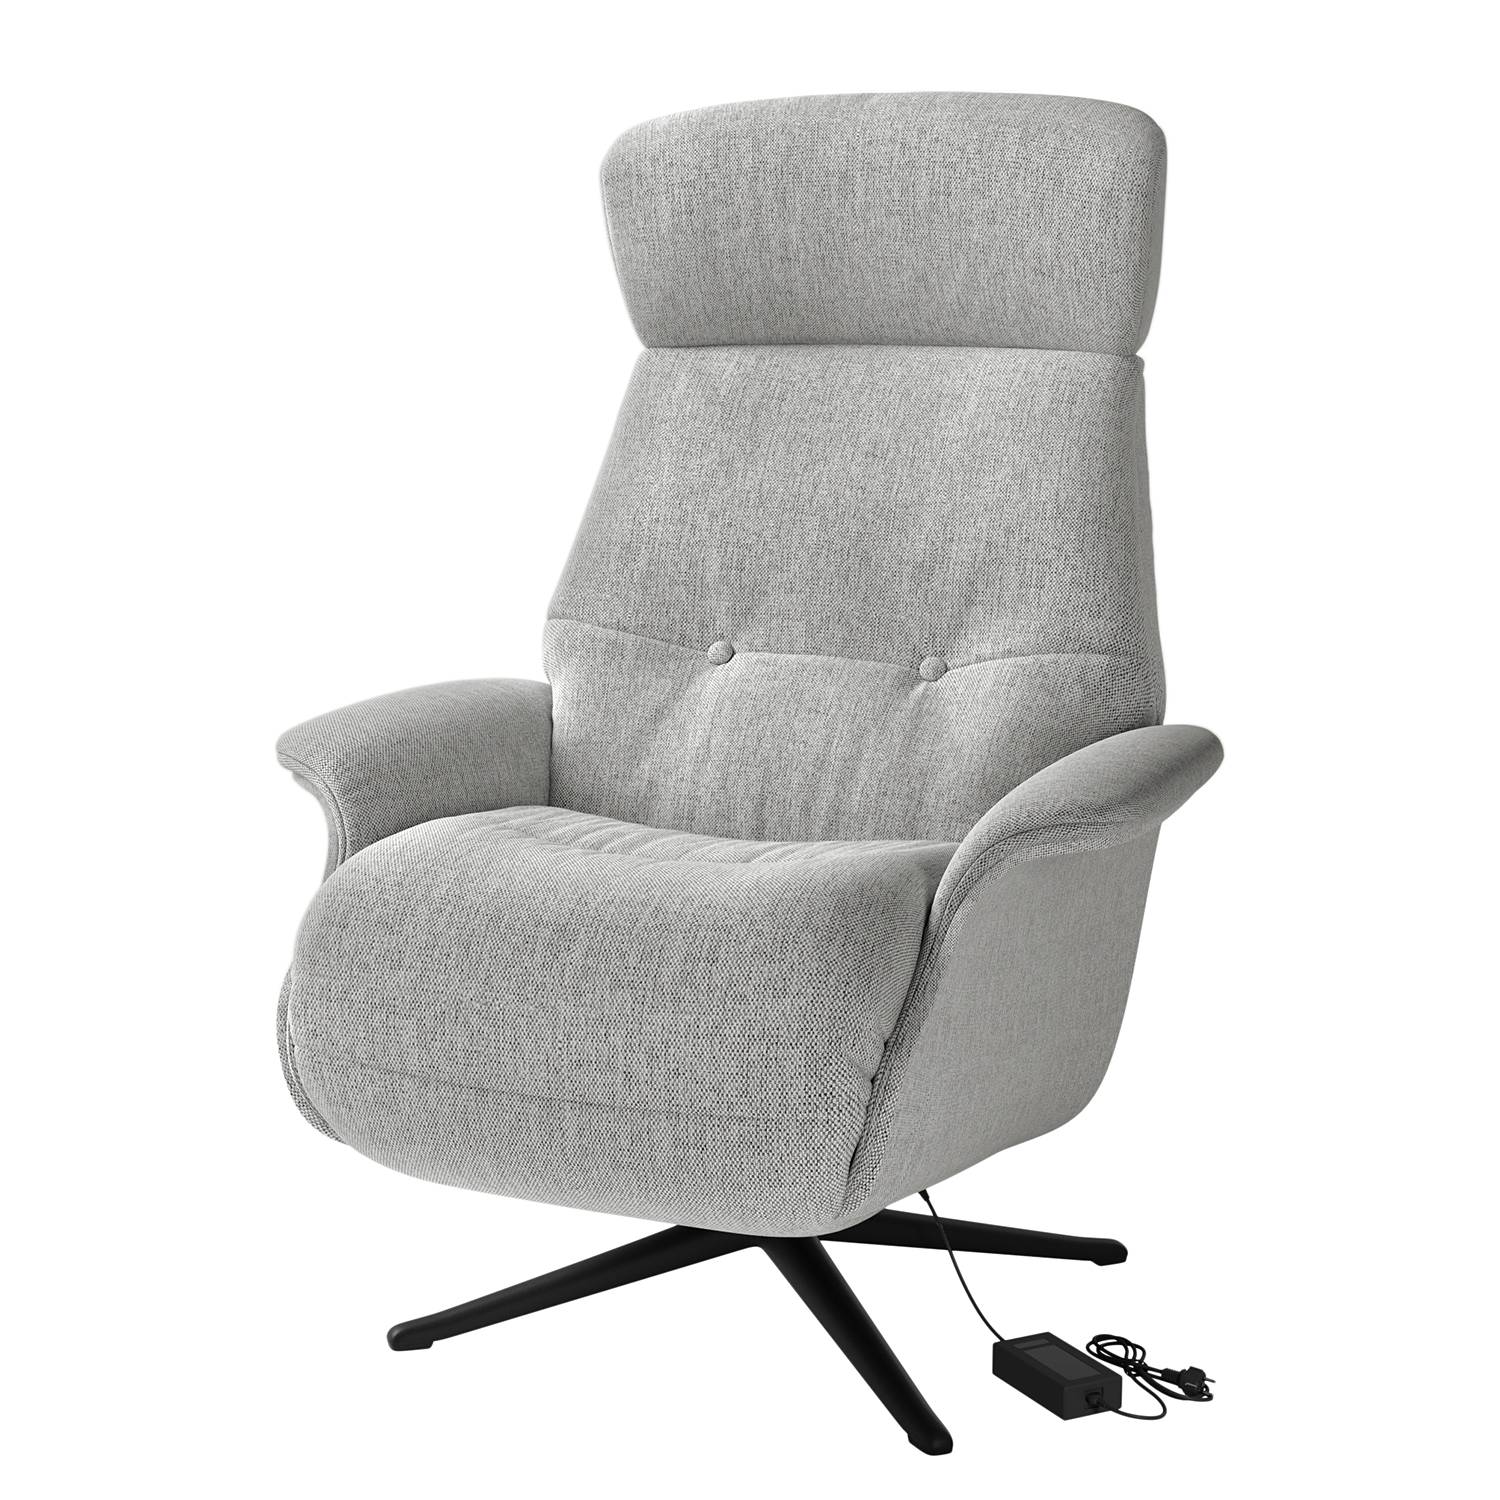 Image of Fauteuil relax Anderson III 000000001000131465